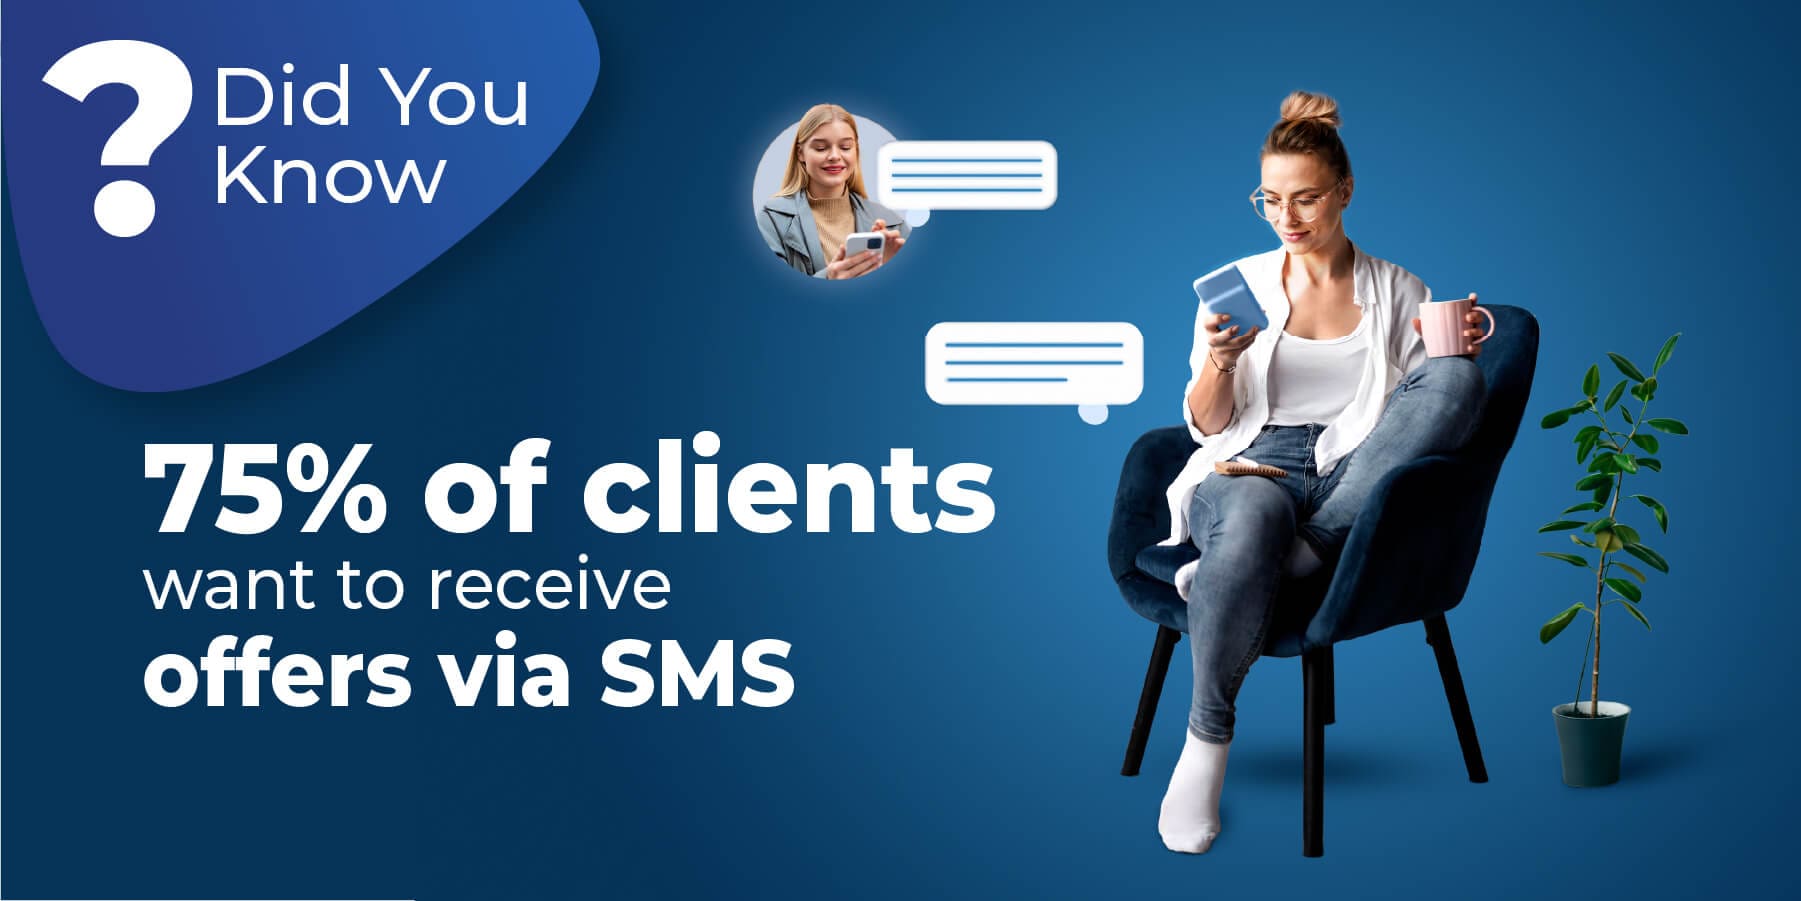 75% of clients prefer offers through SMS